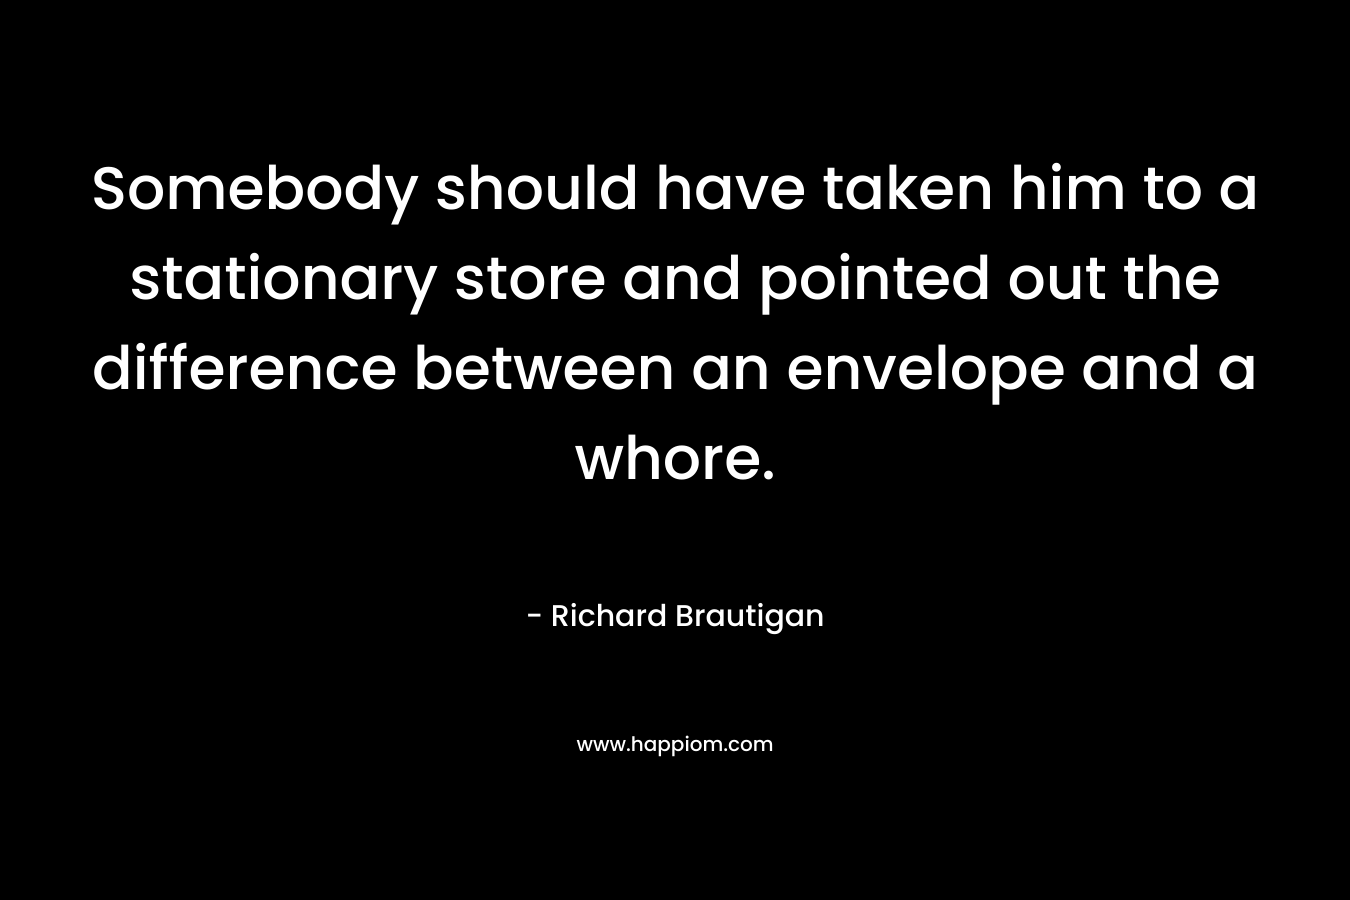 Somebody should have taken him to a stationary store and pointed out the difference between an envelope and a whore. – Richard Brautigan